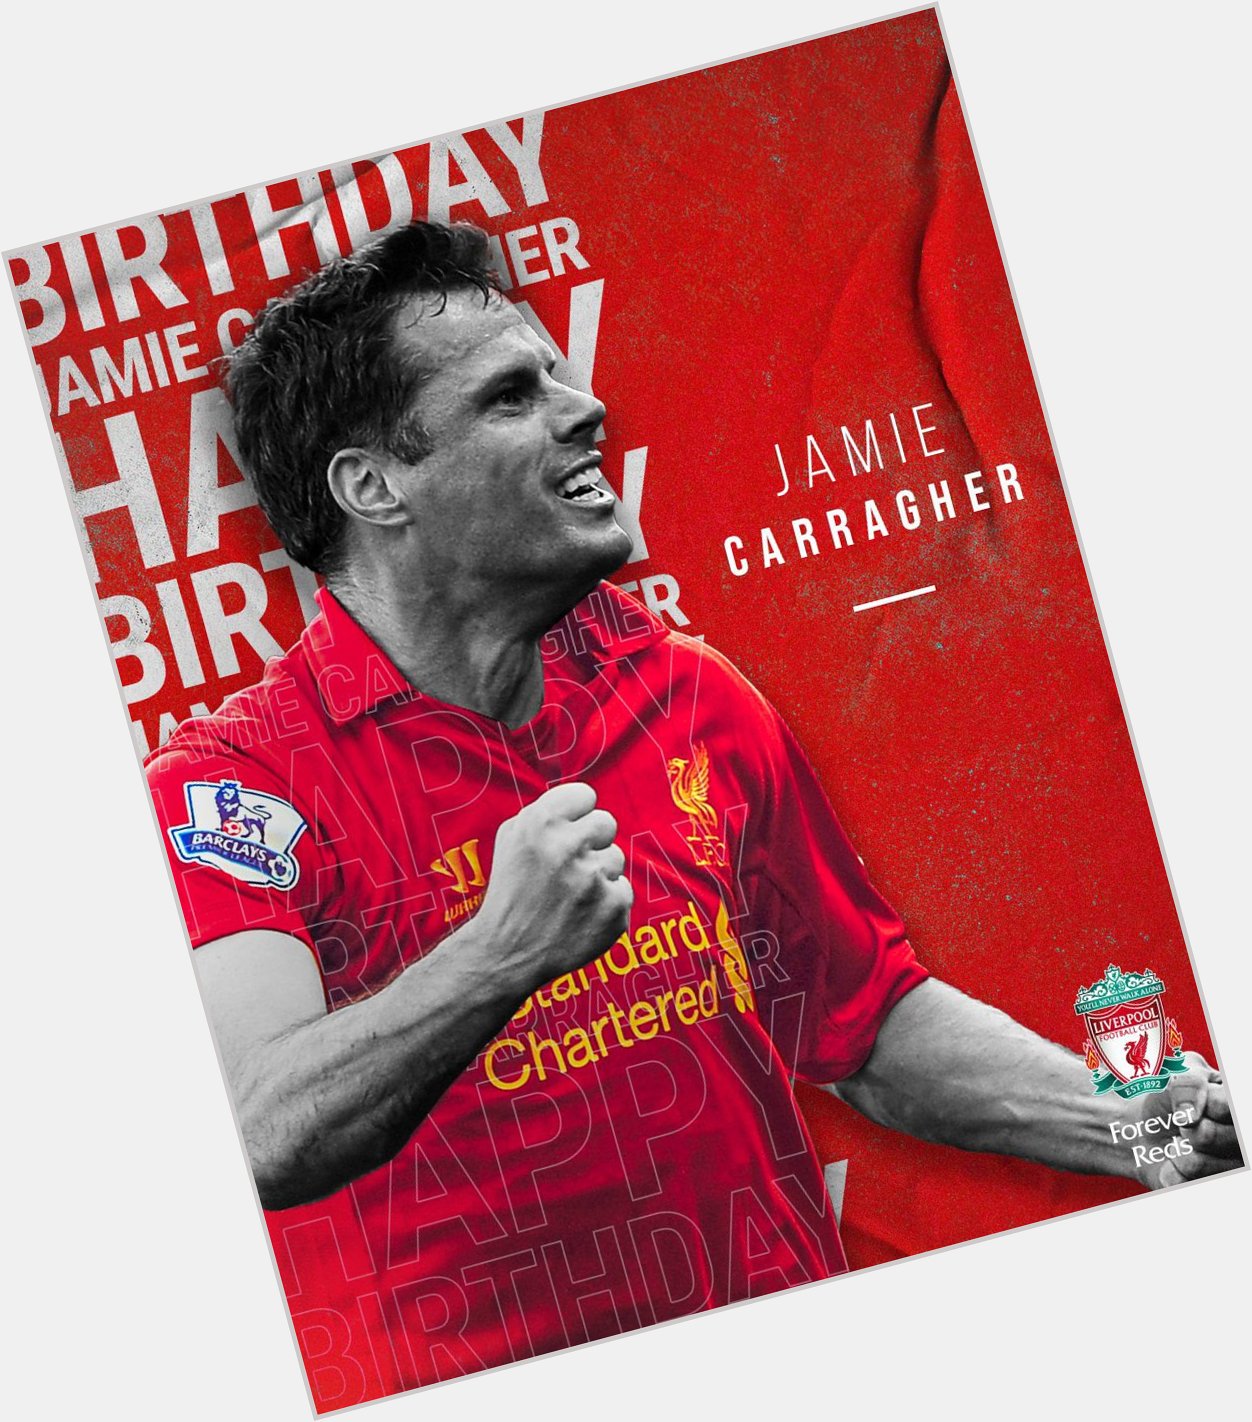 Happy Birthday to Jamie Carragher, who is celebrating his 44th birthday today   